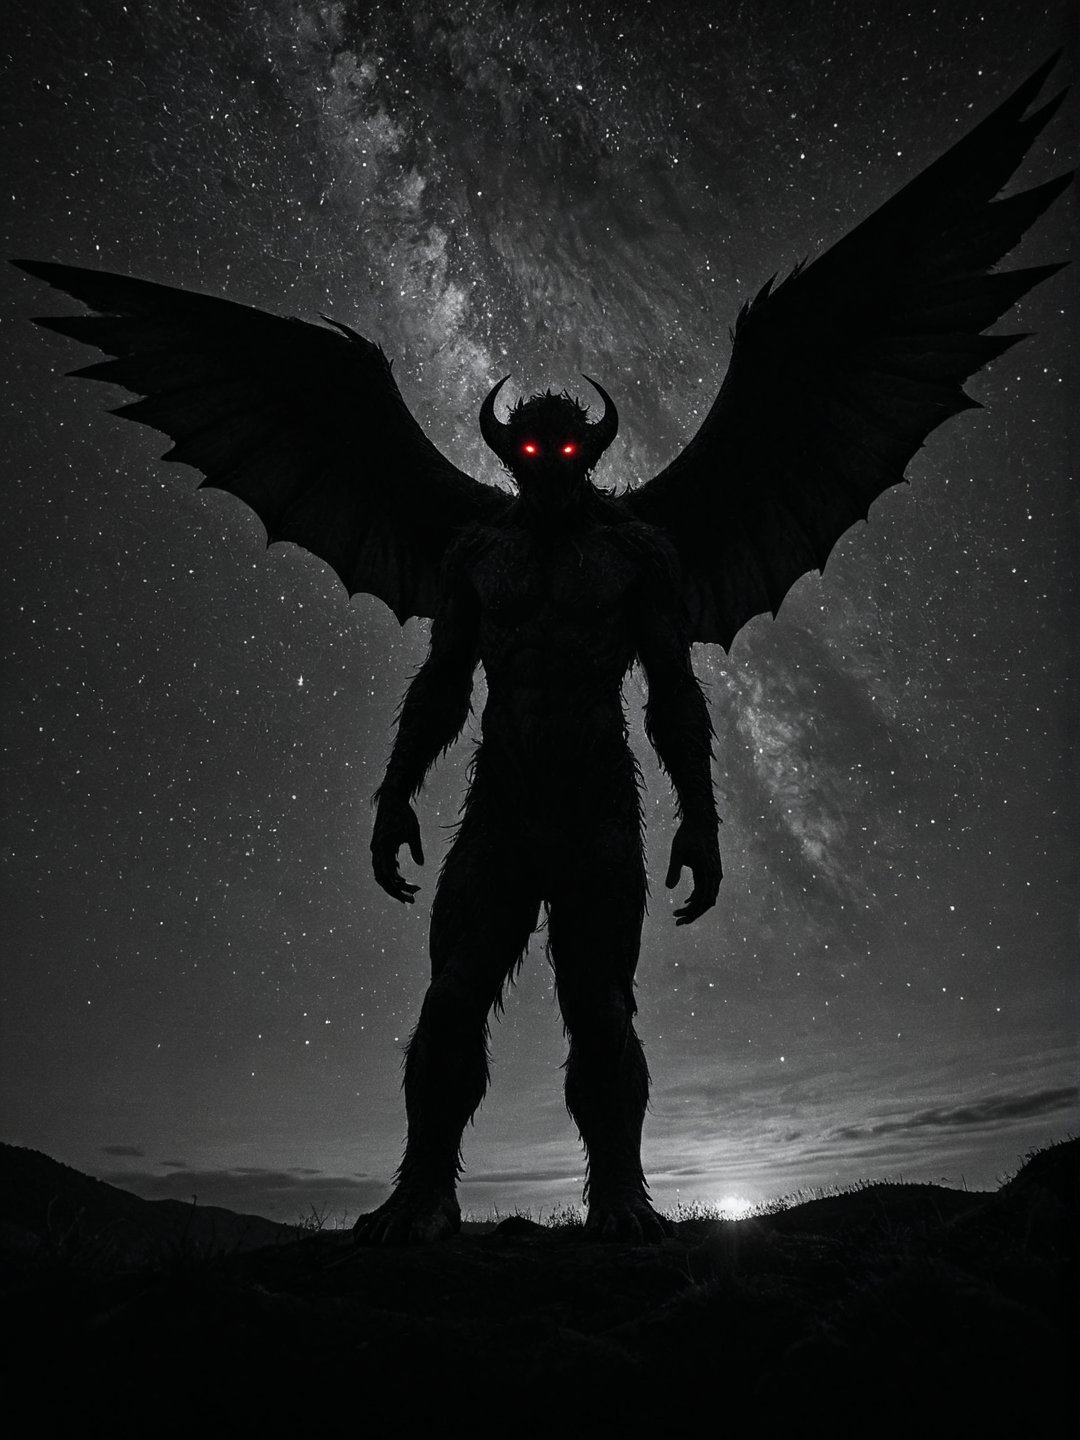 Realism, digital black and white photo, portrait, wide angle of view, Starry sky, silhouette of monster with wings, eyes glow red, dramatic darknes,